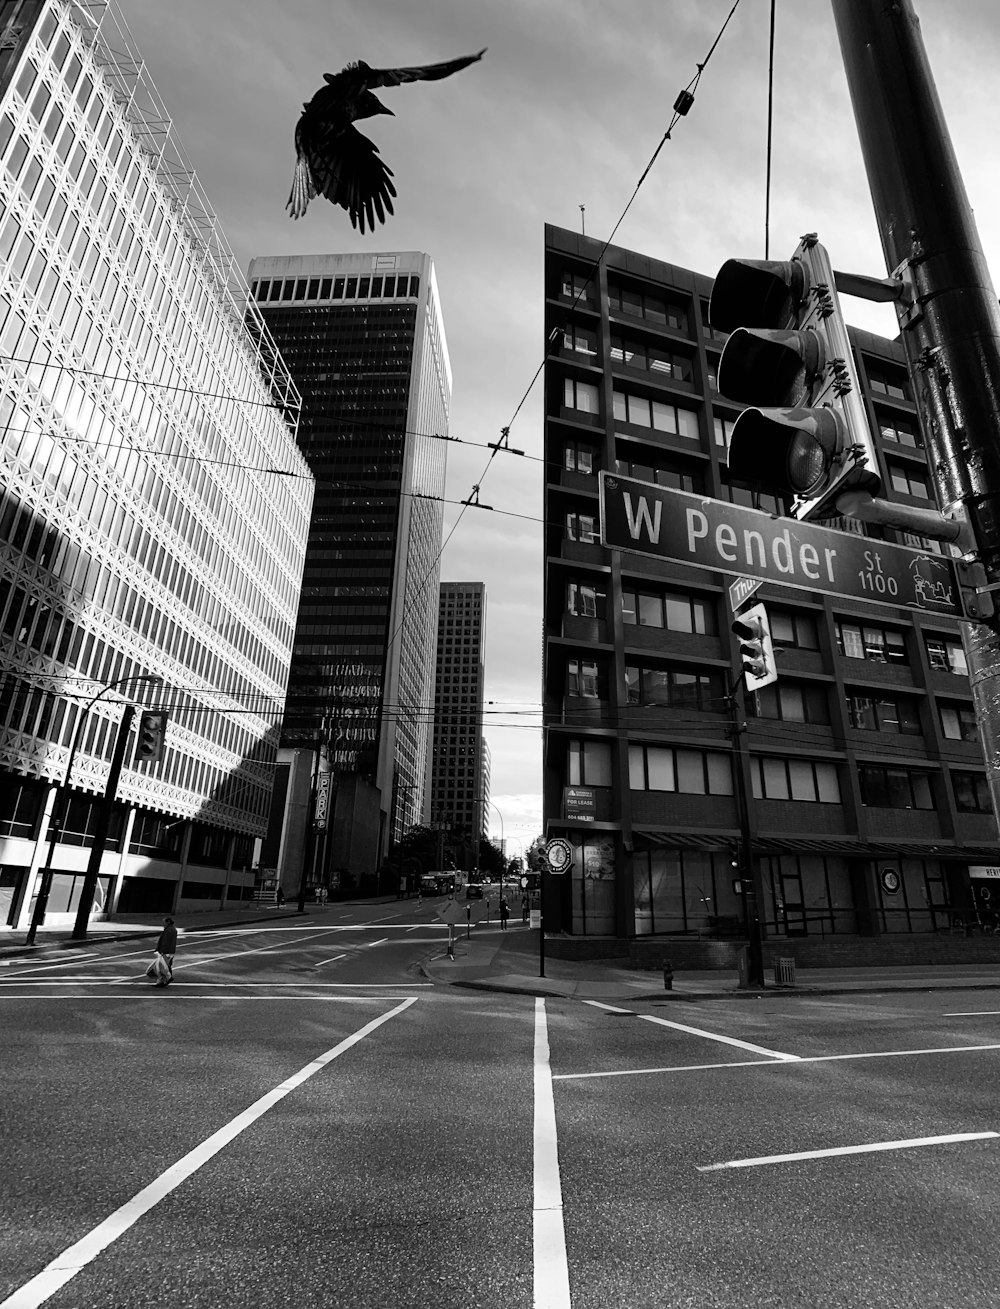 grayscale photography of W Pender building